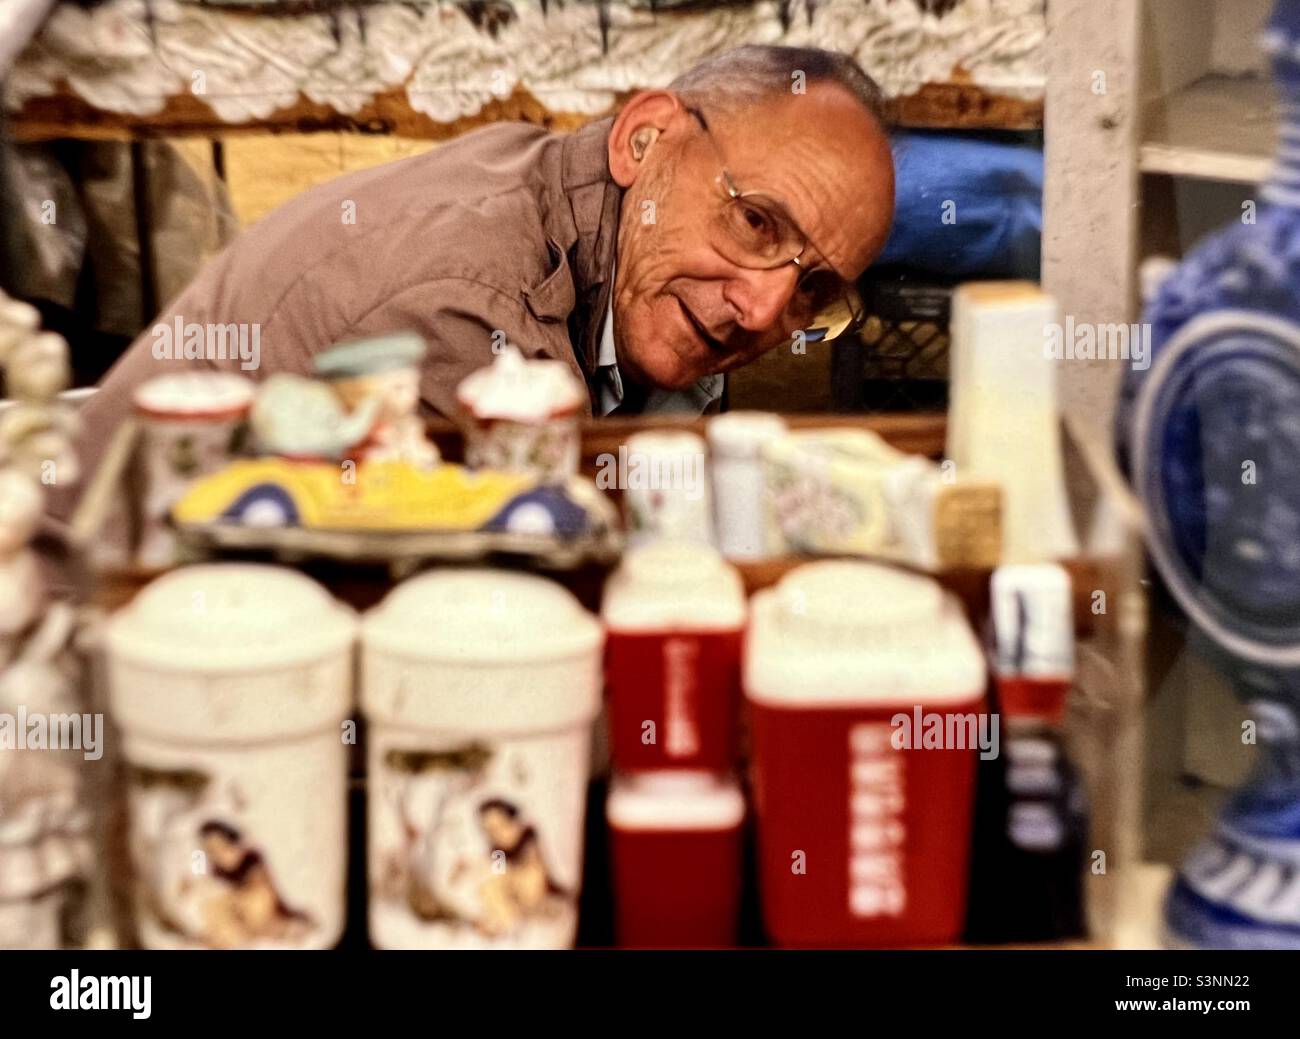 Shopkeeper man behind counter at Independent shop in Berkshires Region of Massachusetts Stock Photo